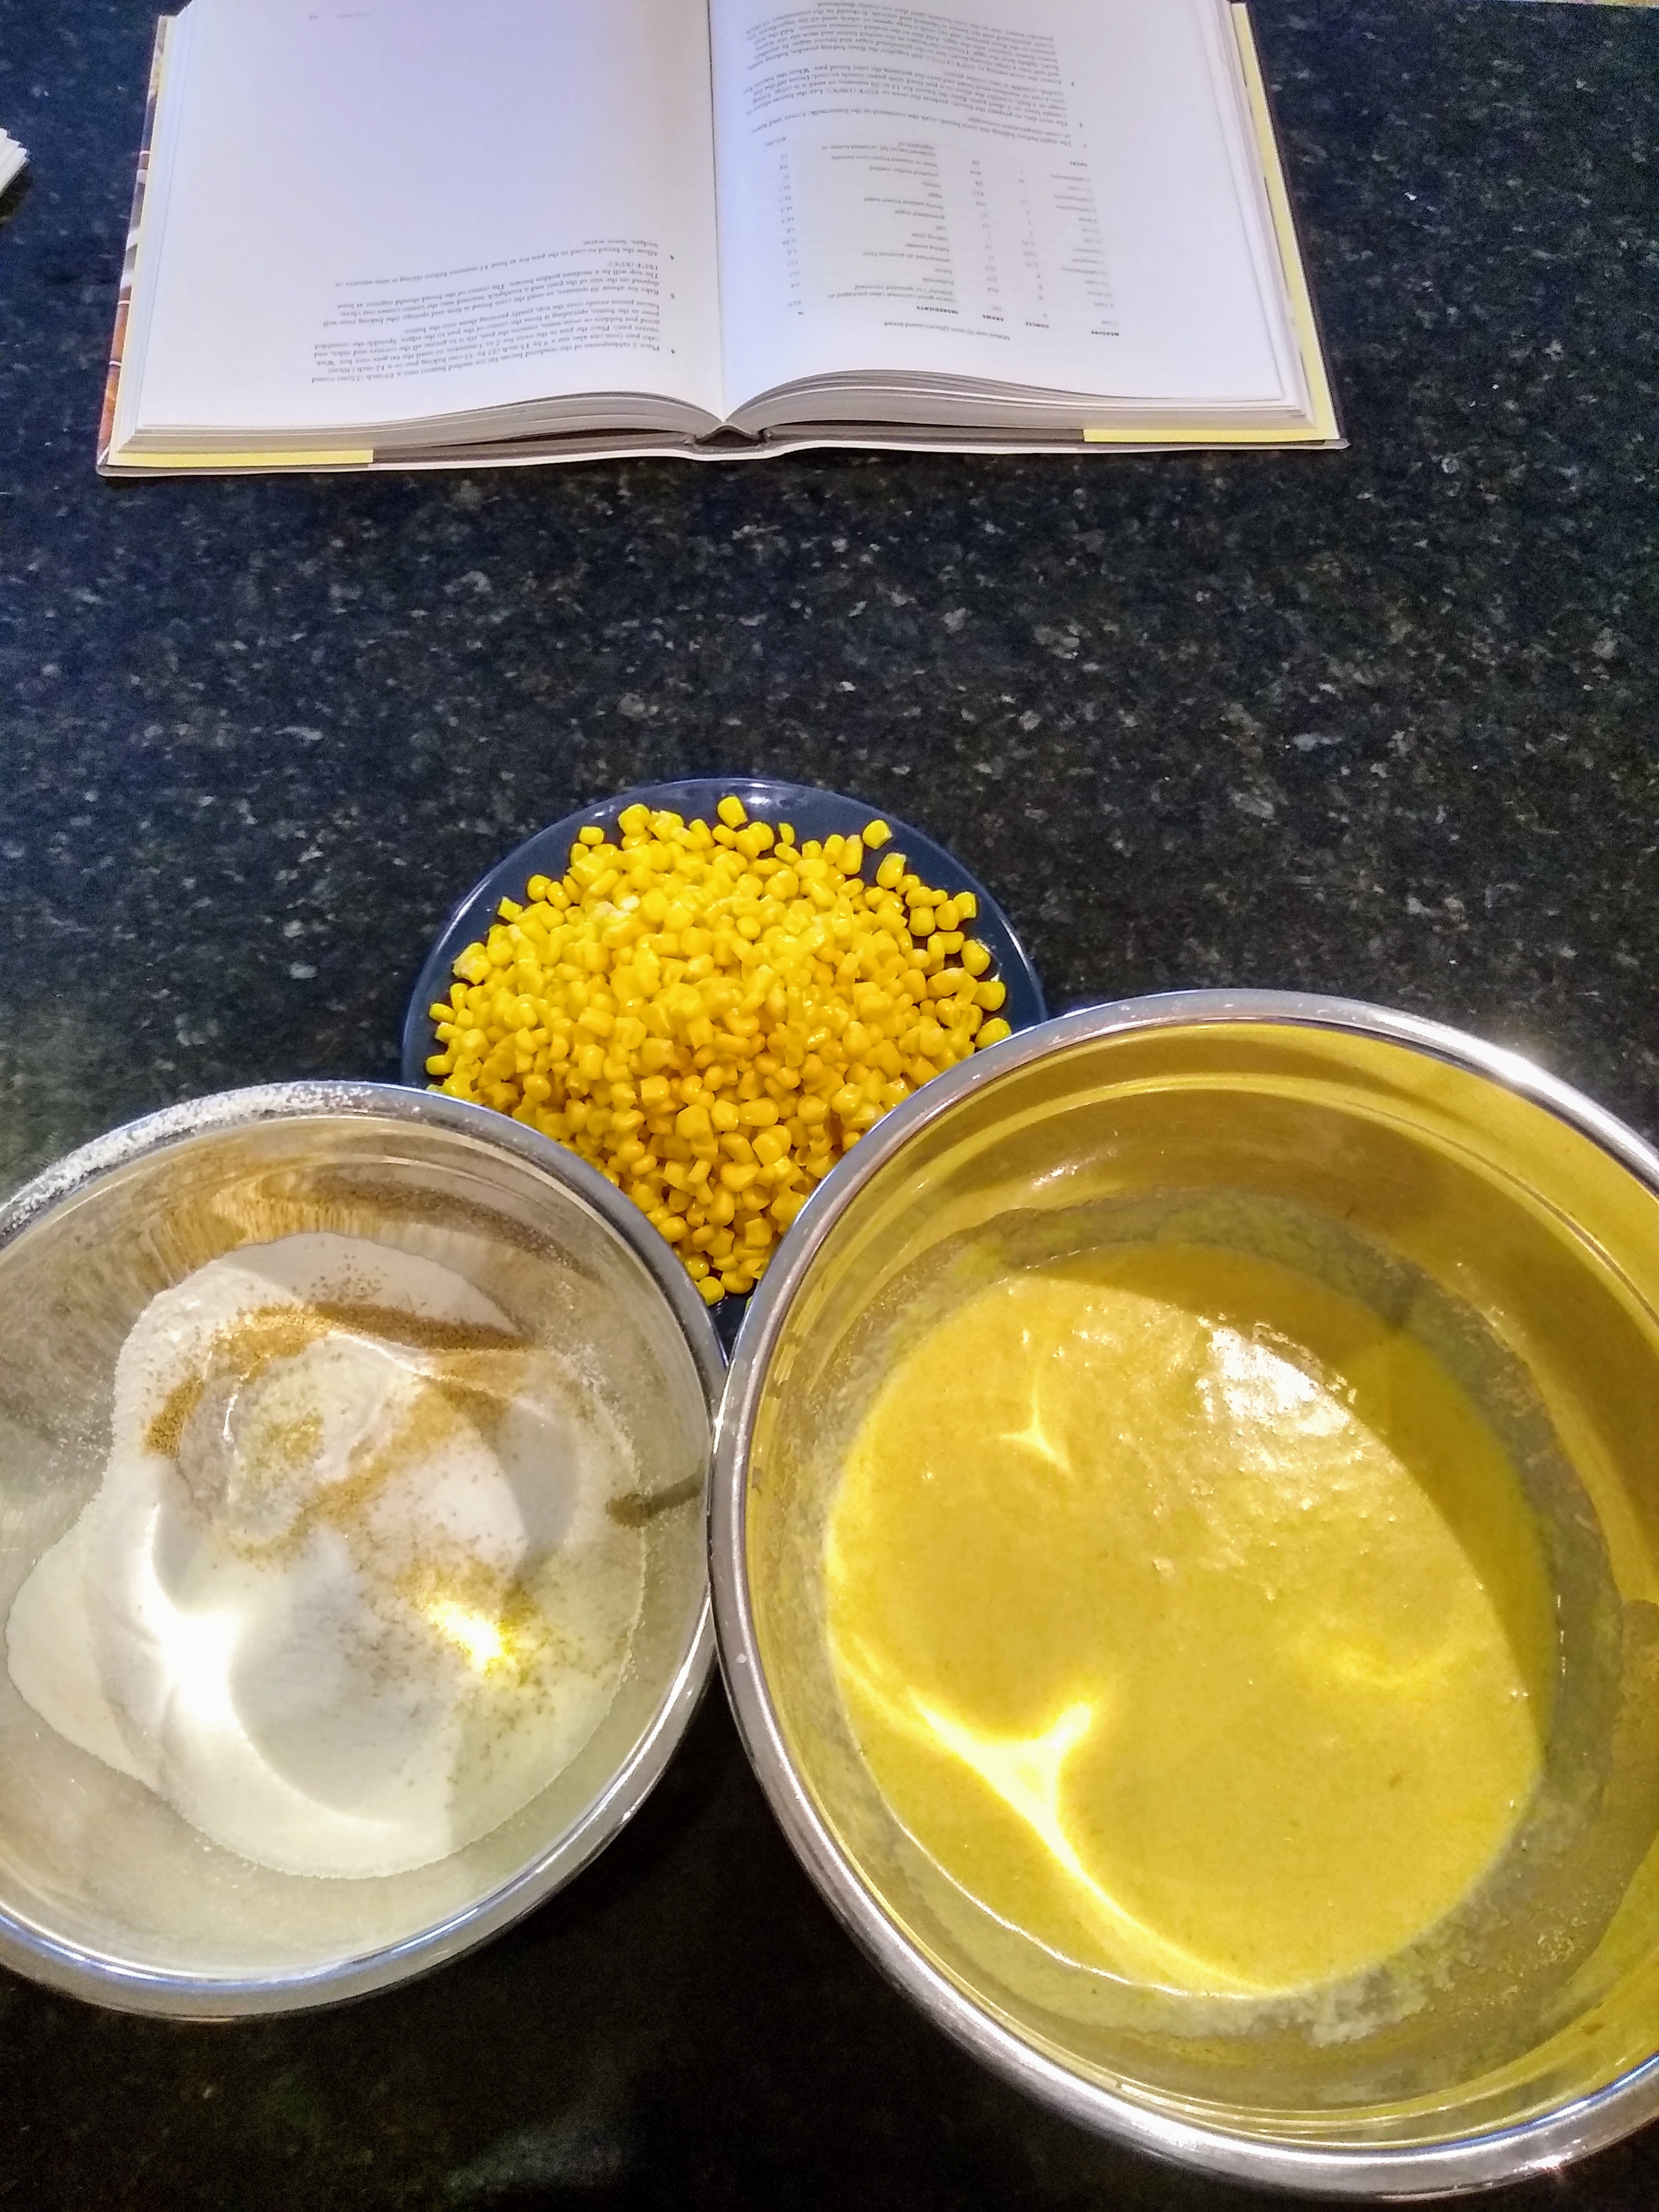 Wet and dry ingredients for corn bread, about ot be mixed